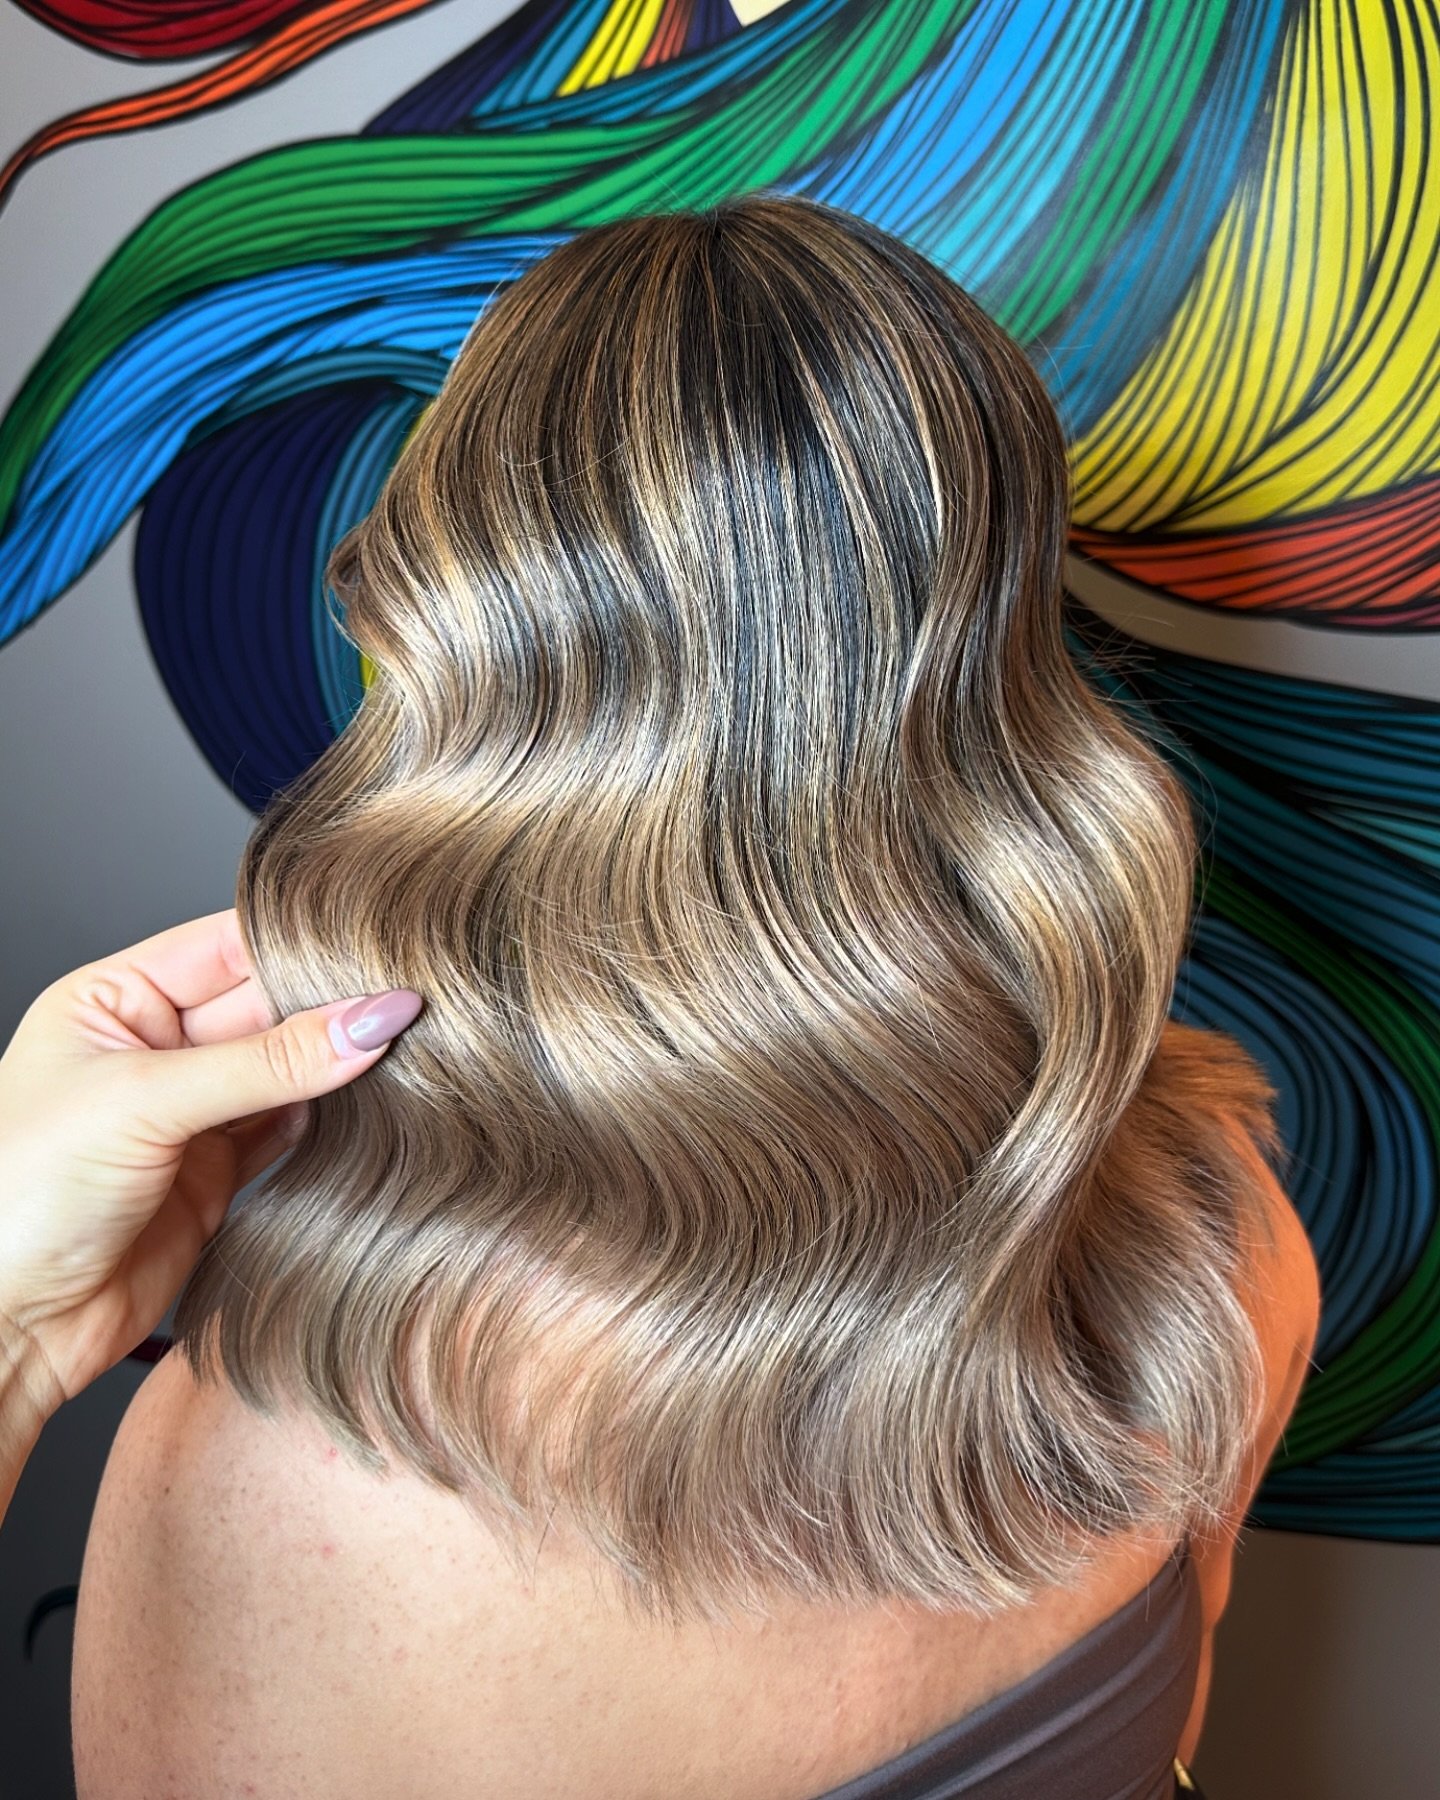 Who doesn&rsquo;t love gorgeous balayage? BIEGEY CREAMY BLONDES. ❤️✨😱 This hair just looks so perfect and dreamy. Geez, Wake us up!! 💕🫰

Cut/Color by @thugsbunny__ 

#adelaidehairsalon #blowitsahairthing #adelaide #hairsalon #adelaidecolourist #ad